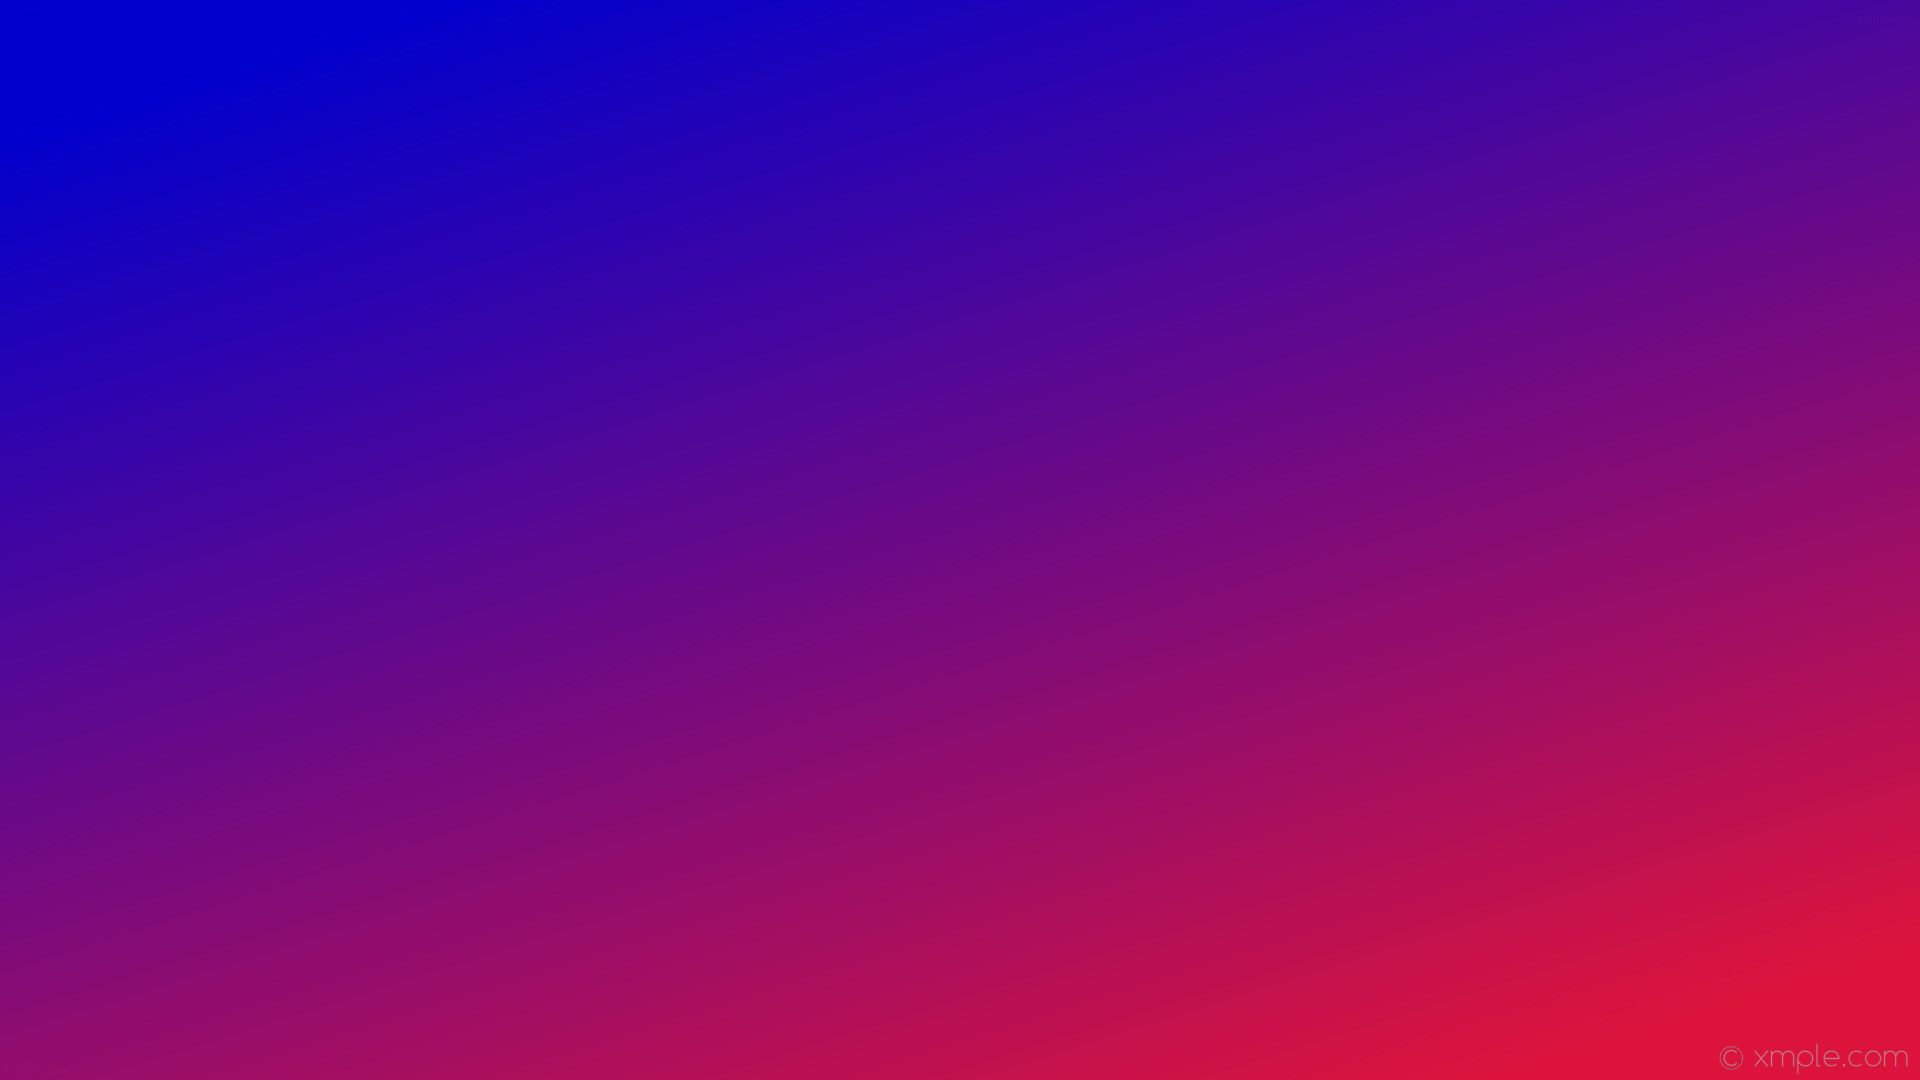 Gradient wallpaper for your iPhone X from the new iOS 11 - Crimson